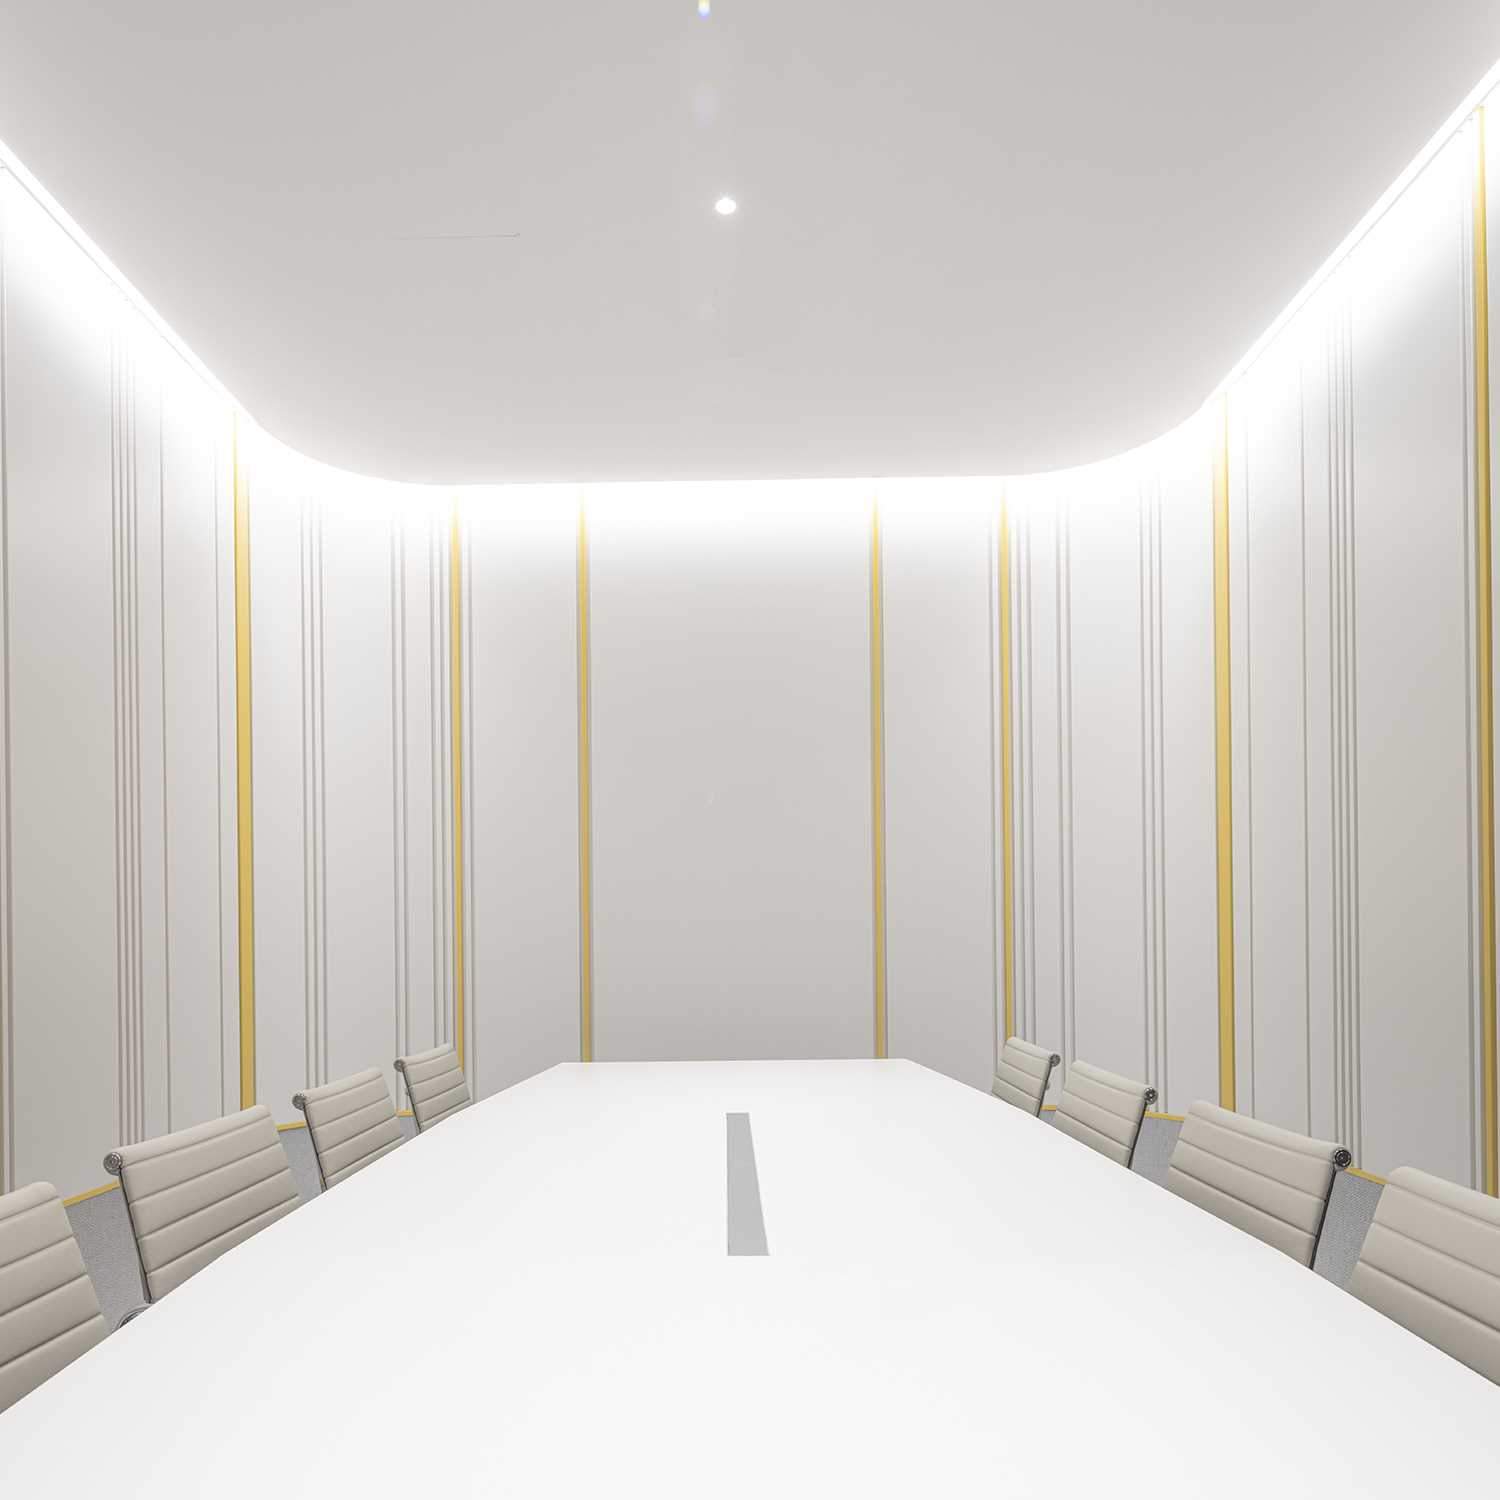 A minimalist and bright meeting room.